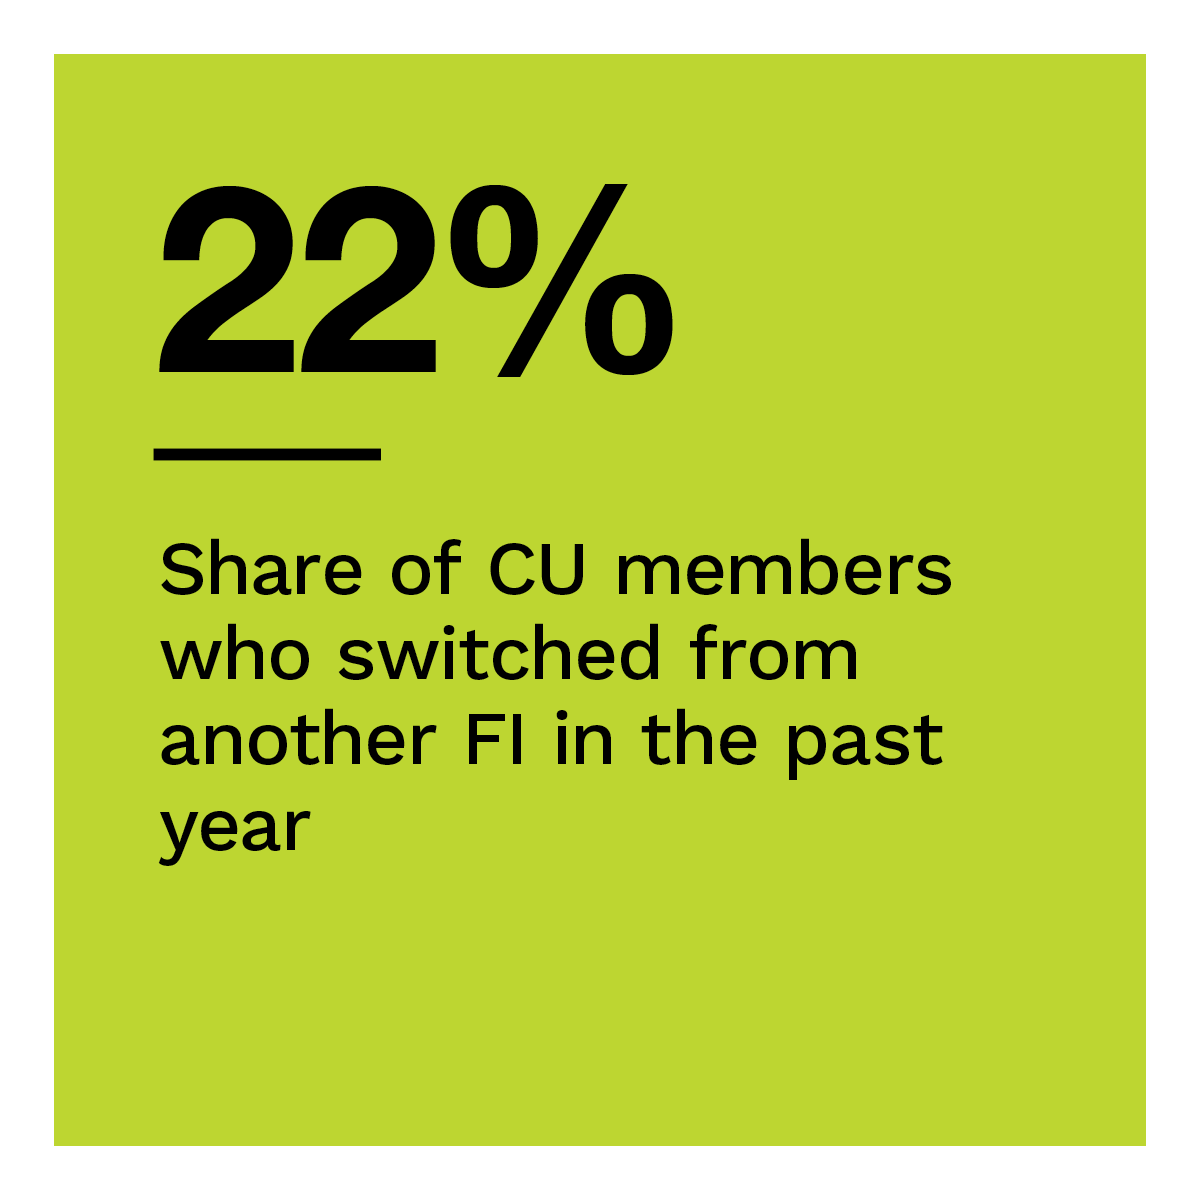 22%: Share of CU members who switched from another FI in the past year